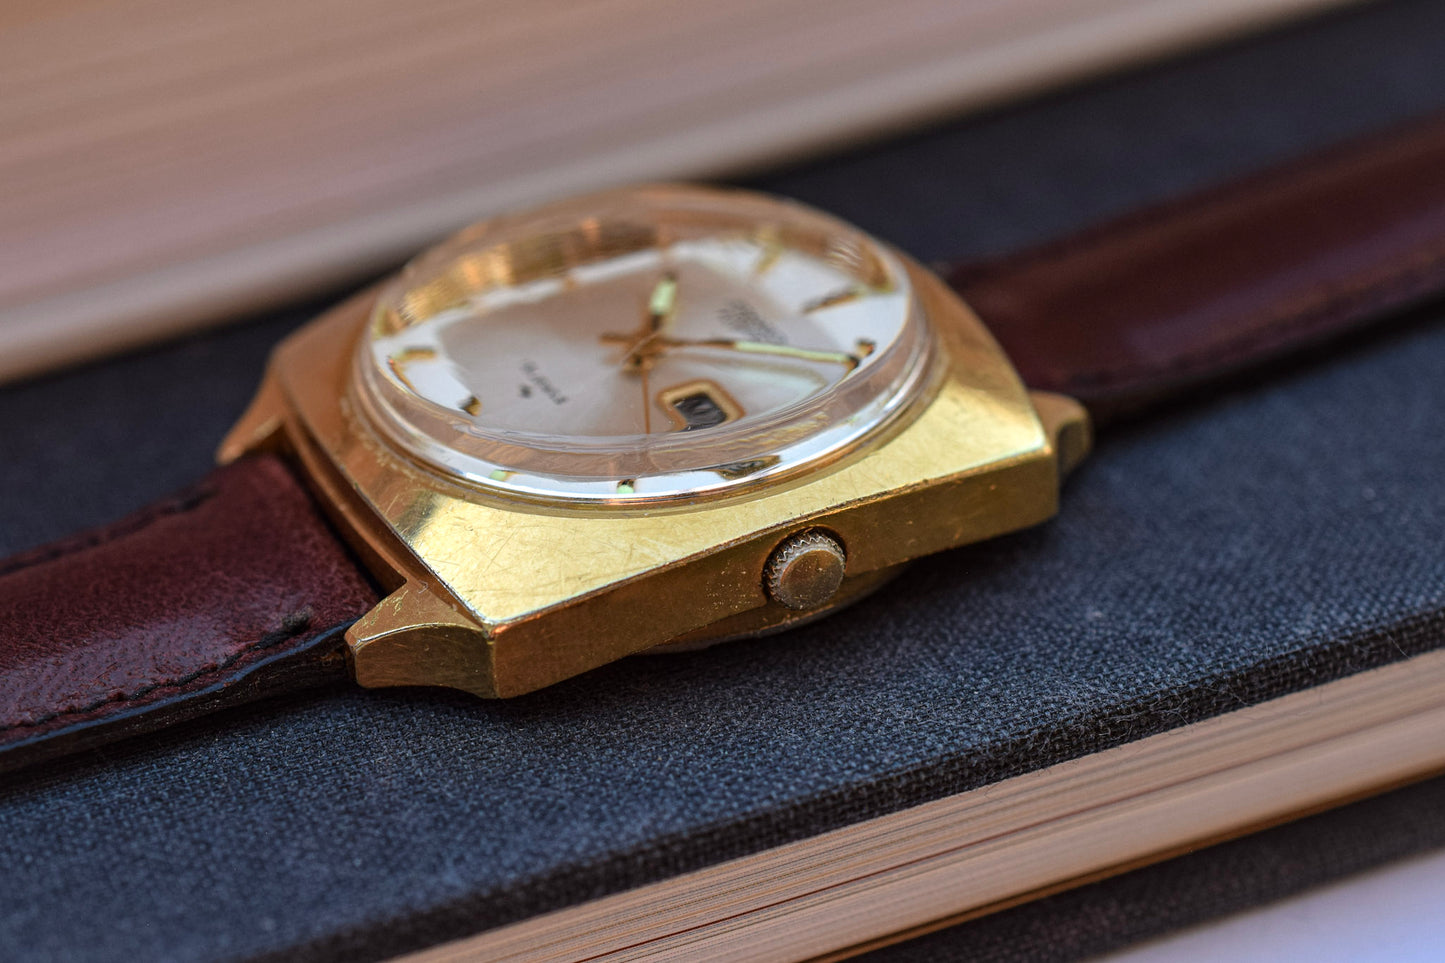 1976 Seiko Automatic Gold-Tone Day/Date Watch